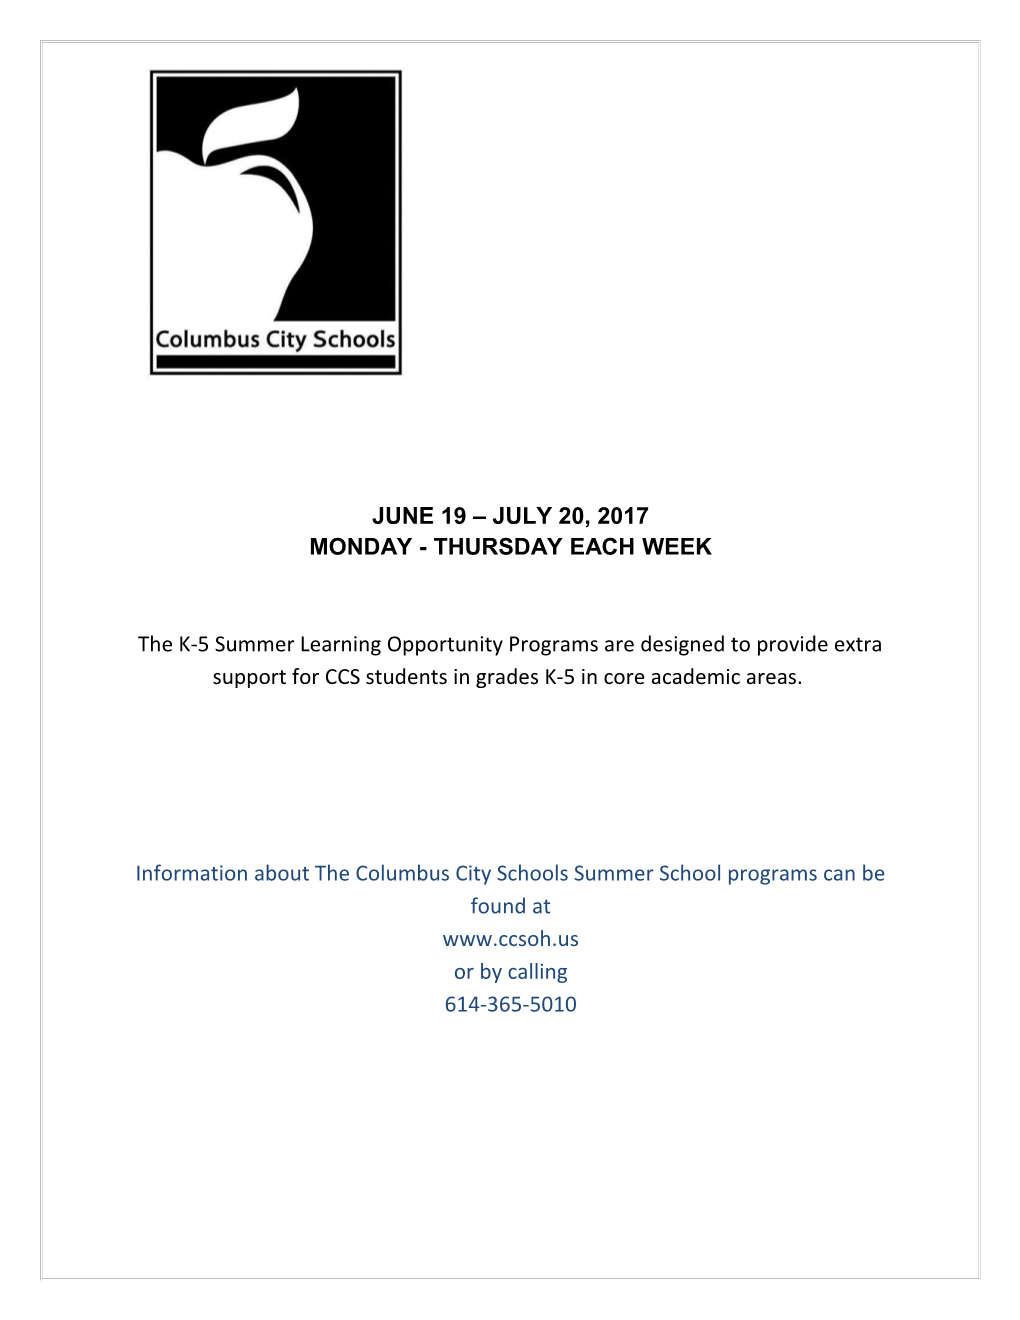 Information About the Columbus City Schools Summer School Programs Can Be Found At